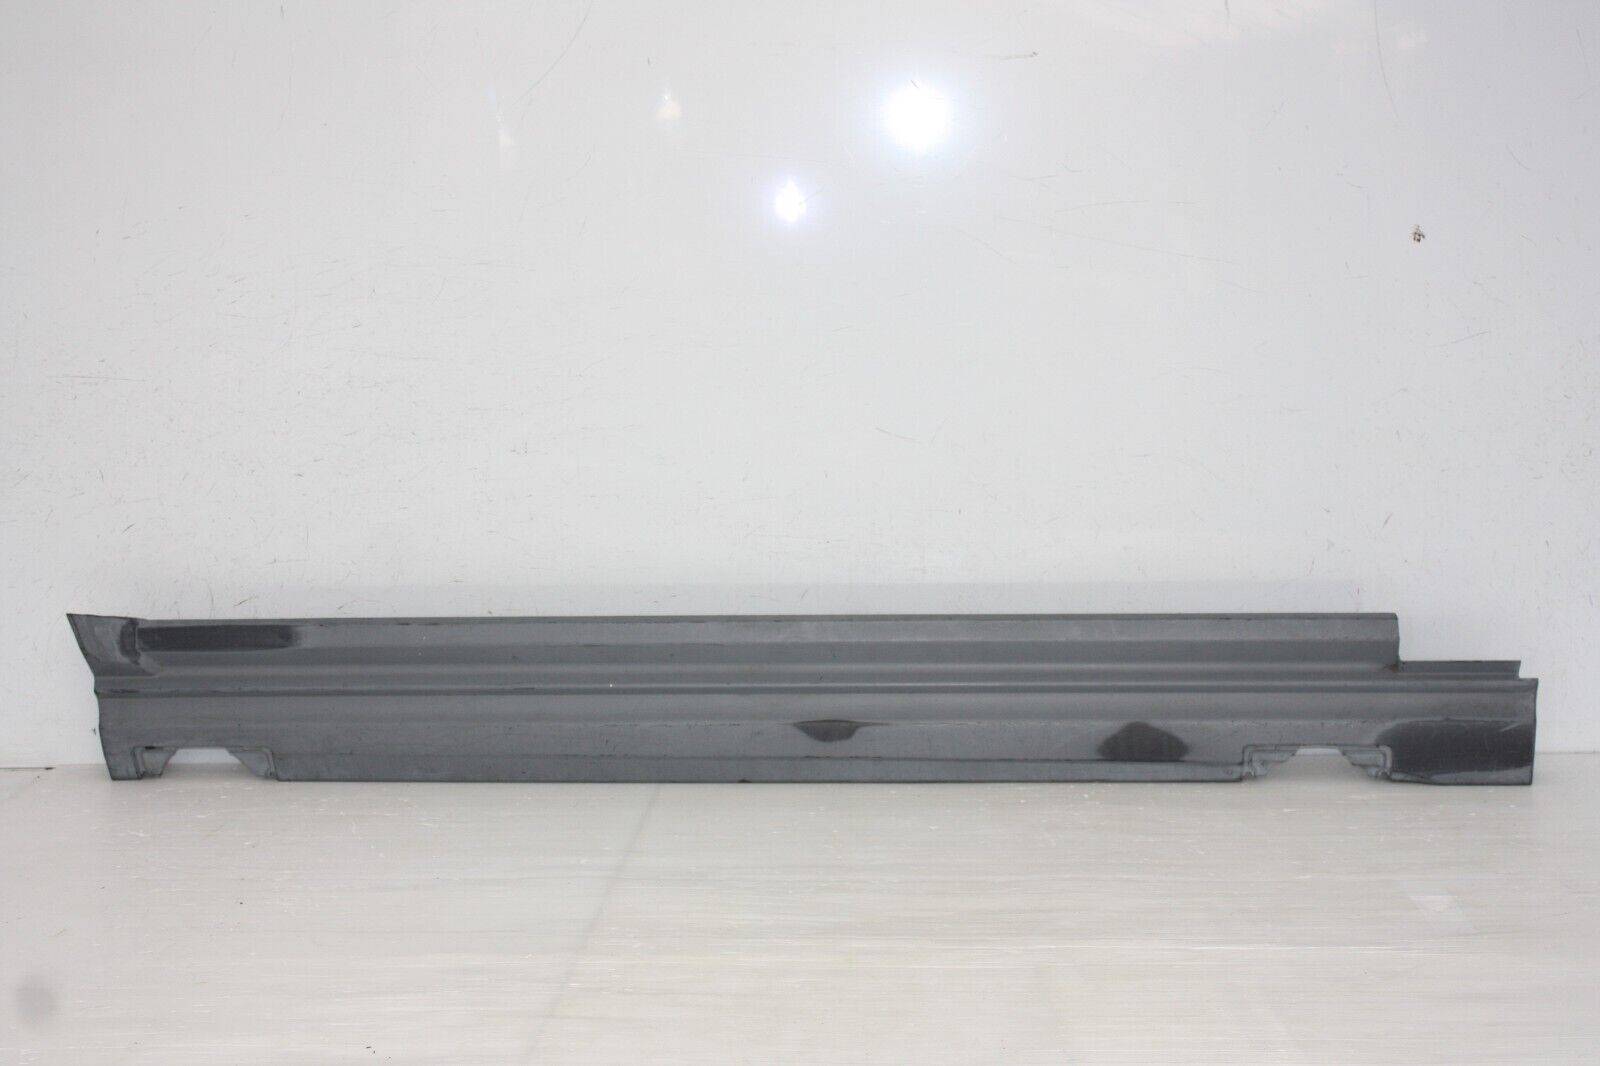 Range Rover Autobiography Right Side Skirt 2009 TO 2012 BH4M 200B08 A Genuine 175443404552